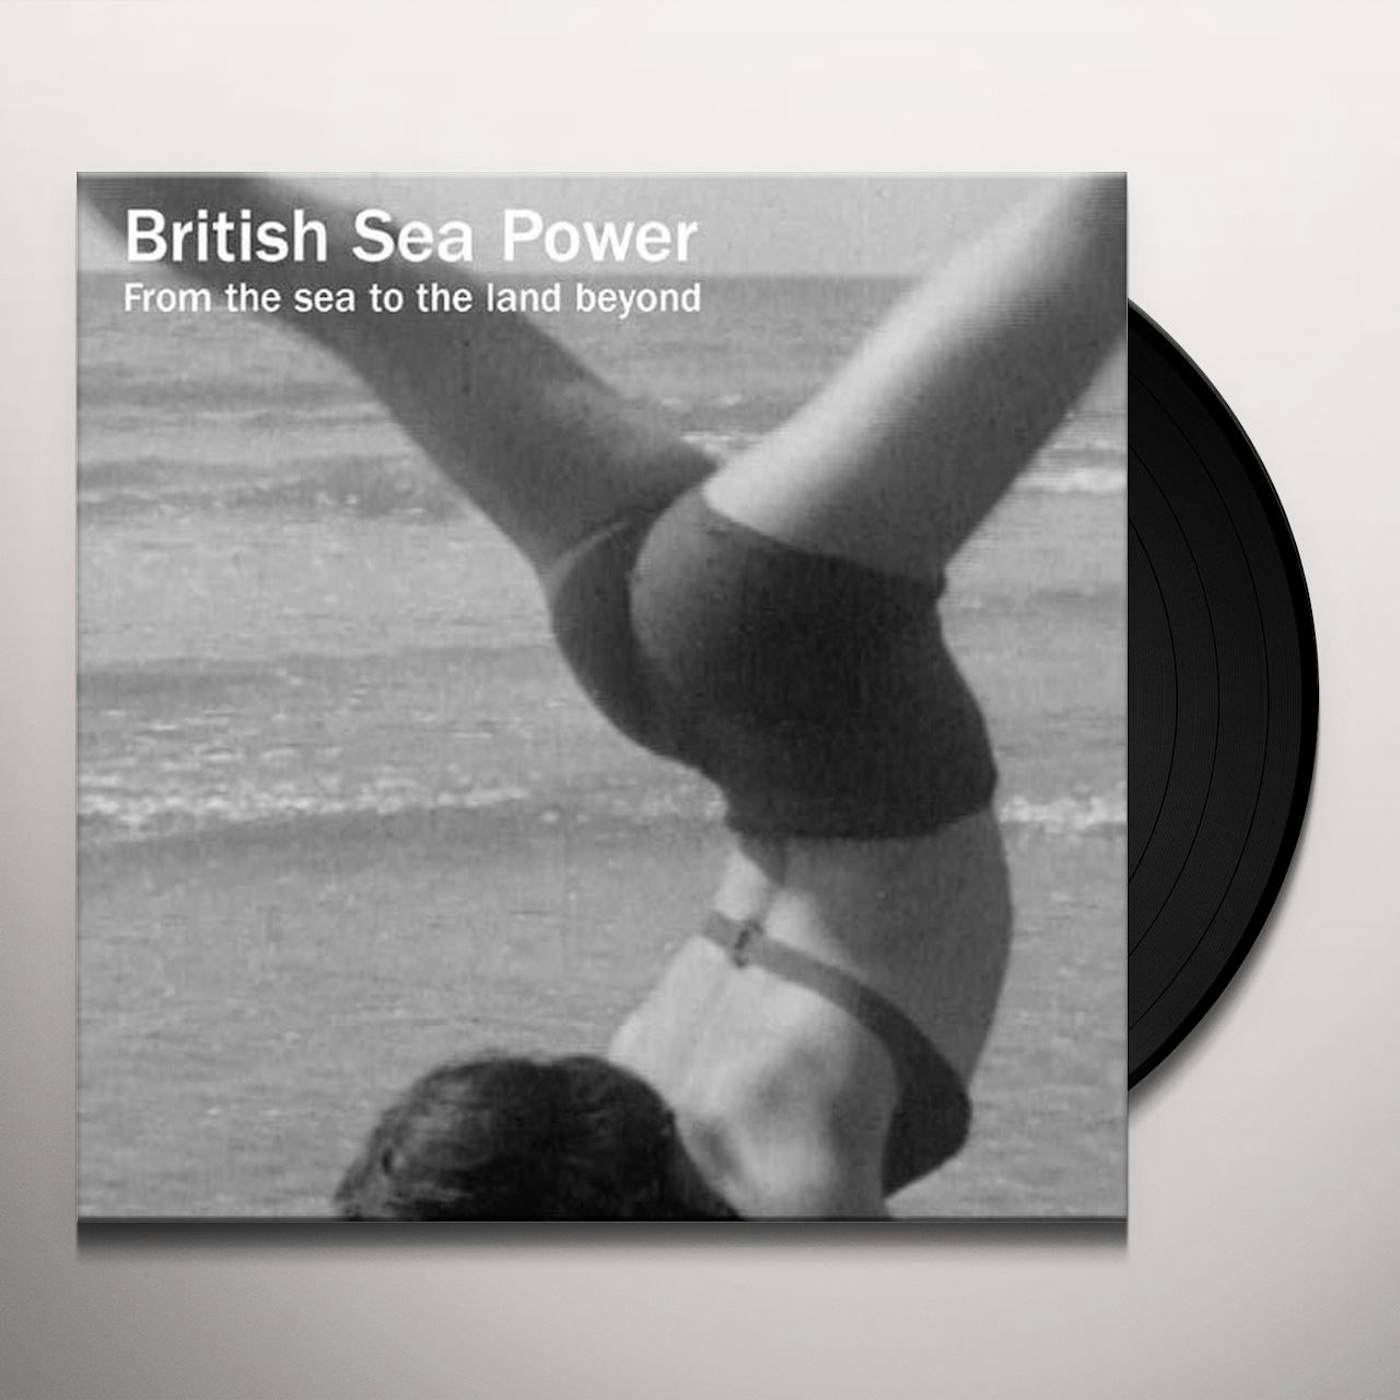 British Sea Power FROM THE SEA TO THE LAND BEYOND (2LP/DVD) Vinyl Record